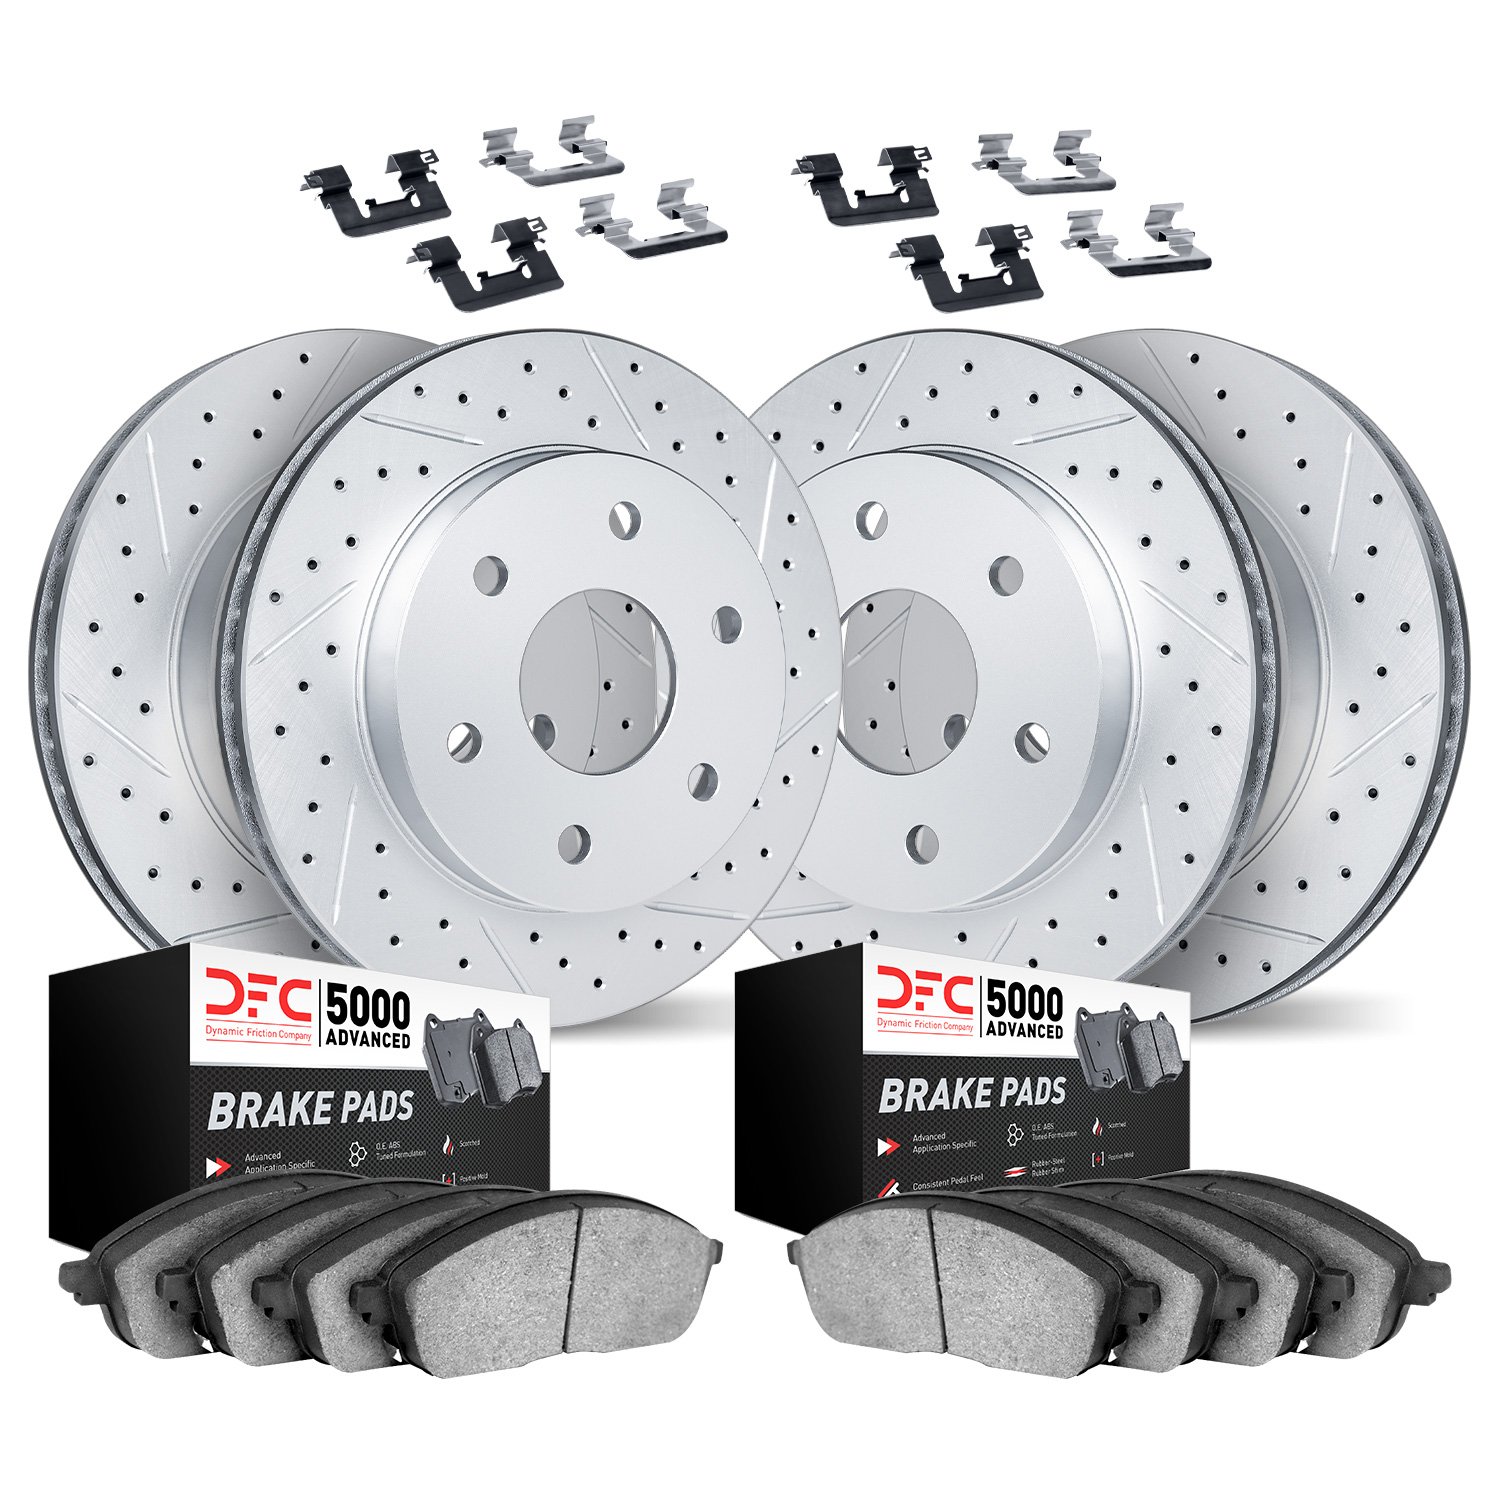 2514-48032 Geoperformance Drilled/Slotted Rotors w/5000 Advanced Brake Pads Kit & Hardware, 2007-2017 GM, Position: Front and Re